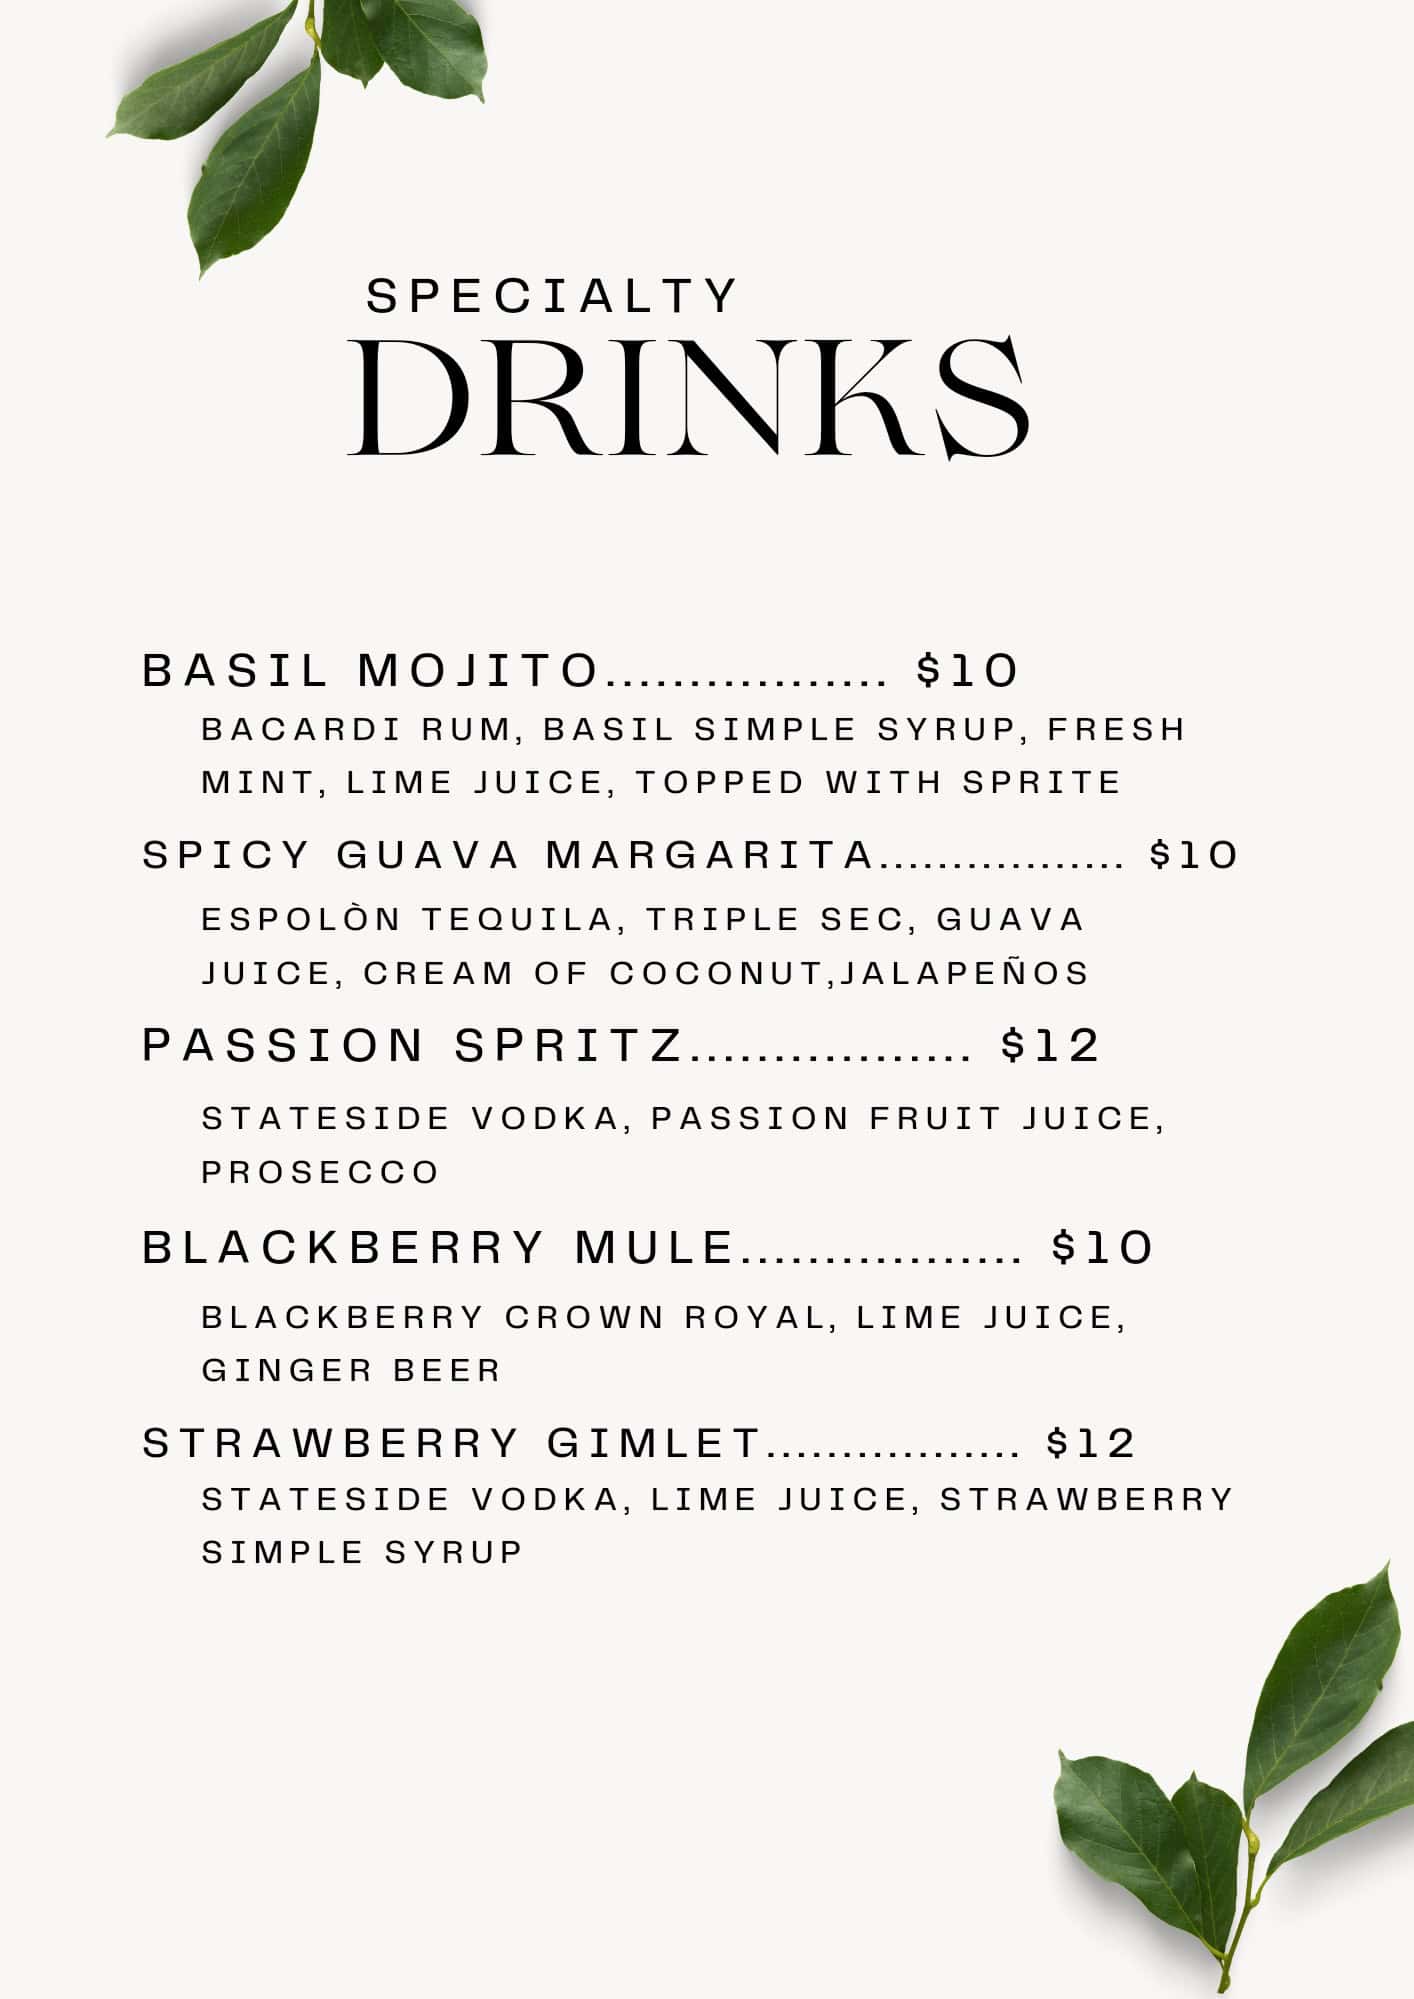 Menu Listing Specialty Drinks With Names And Prices, Featuring Ingredients Like Guava, Basil, And Coconut, Accompanied By Fresh Basil Leaves.